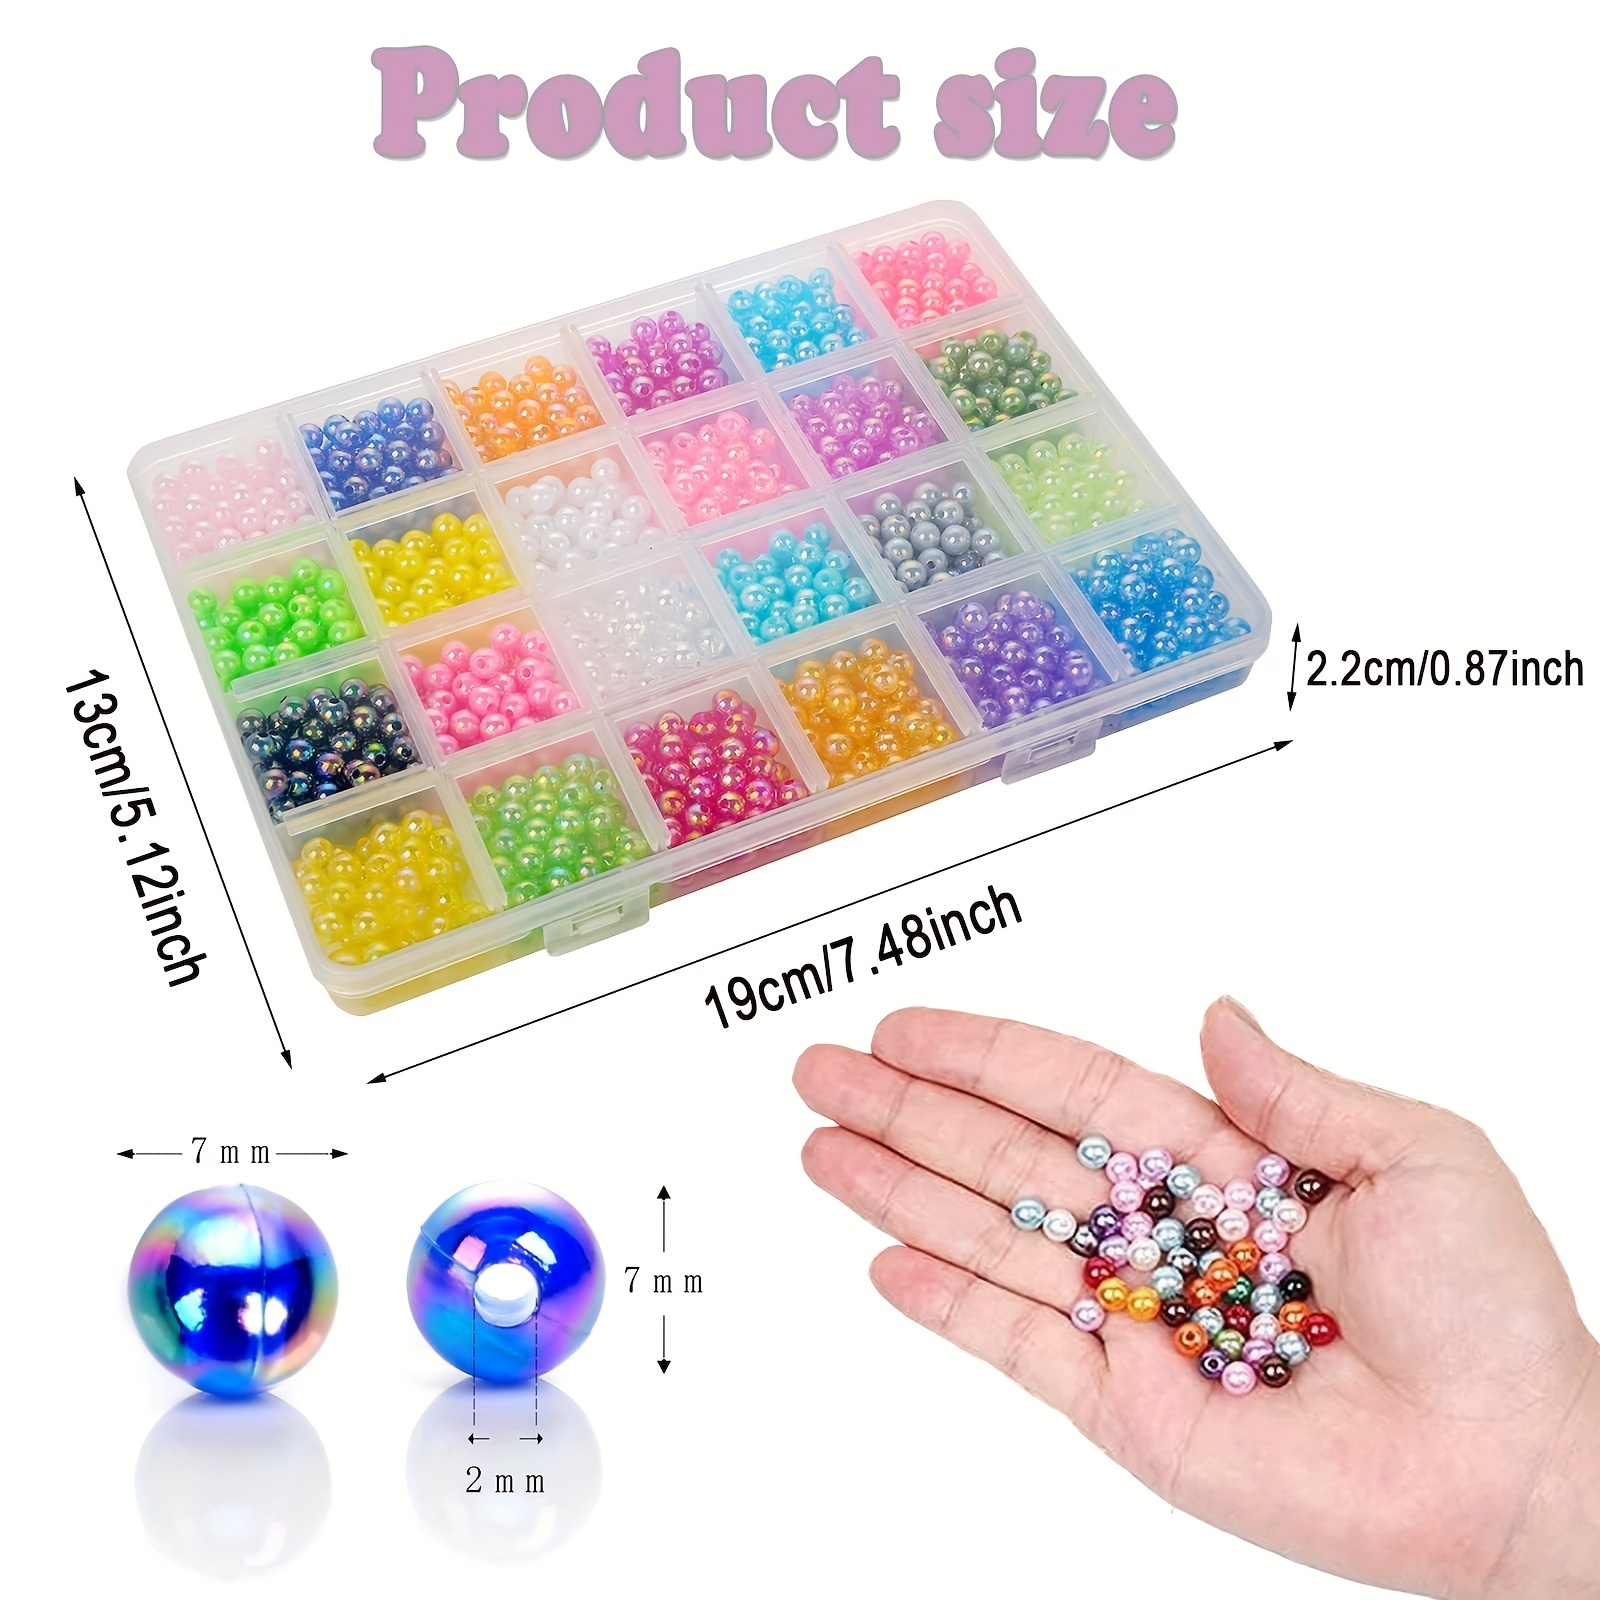  1680PCS 6mm Pearl Beads for Crafts, 24 Colors Multicolor Pearl  Beads with Hole for Jewelry Making and Crafting Bracelet Necklace Earrings